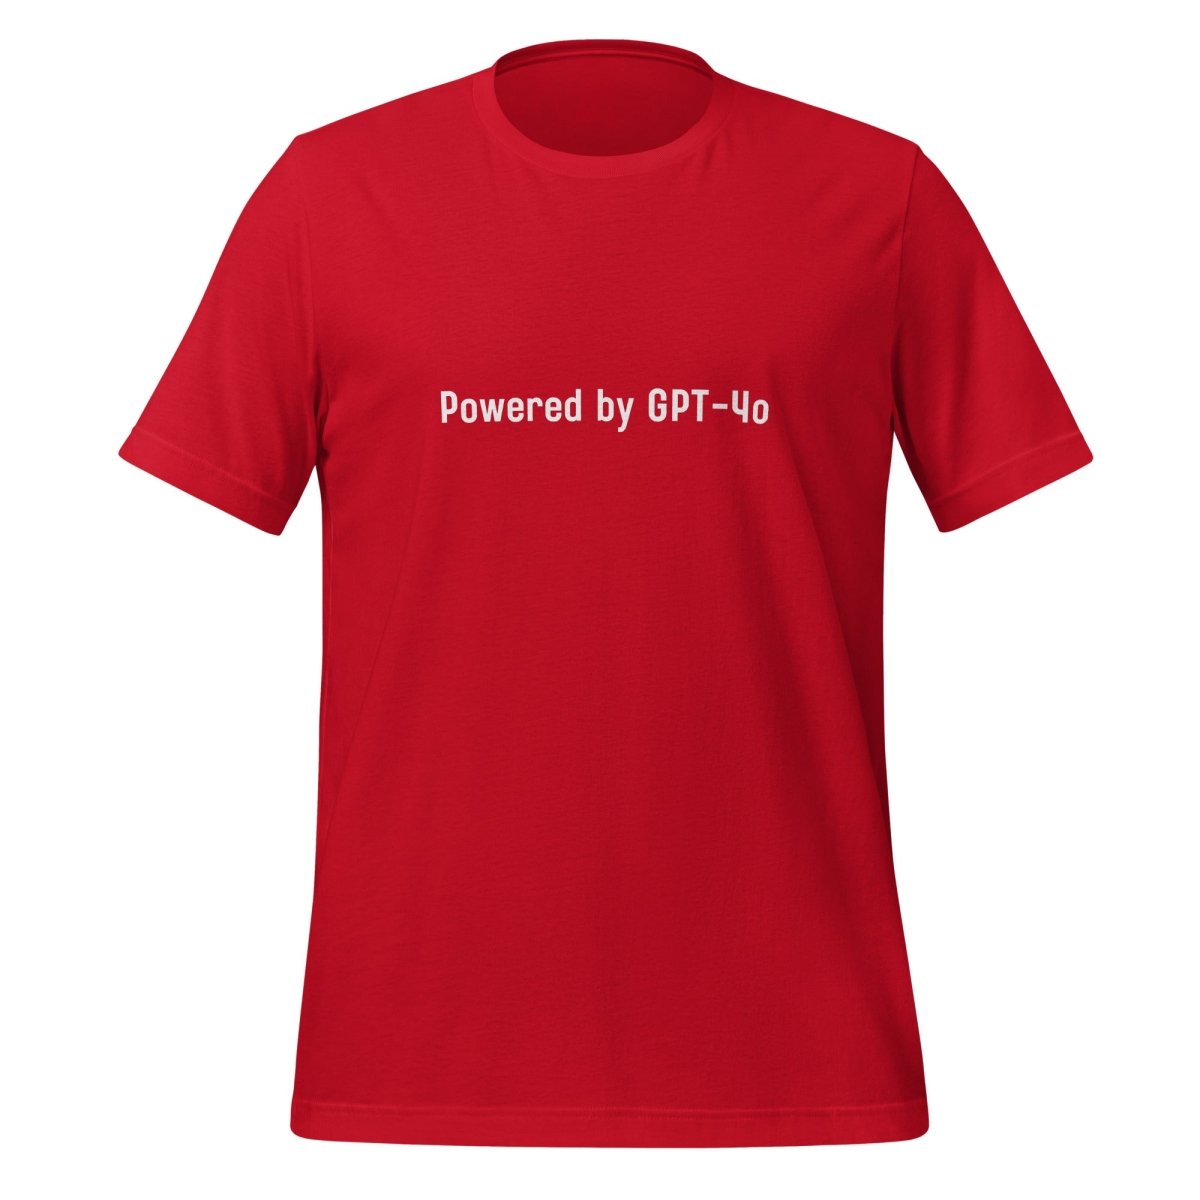 Powered by GPT - 4o T - Shirt 3 (unisex) - Red - AI Store